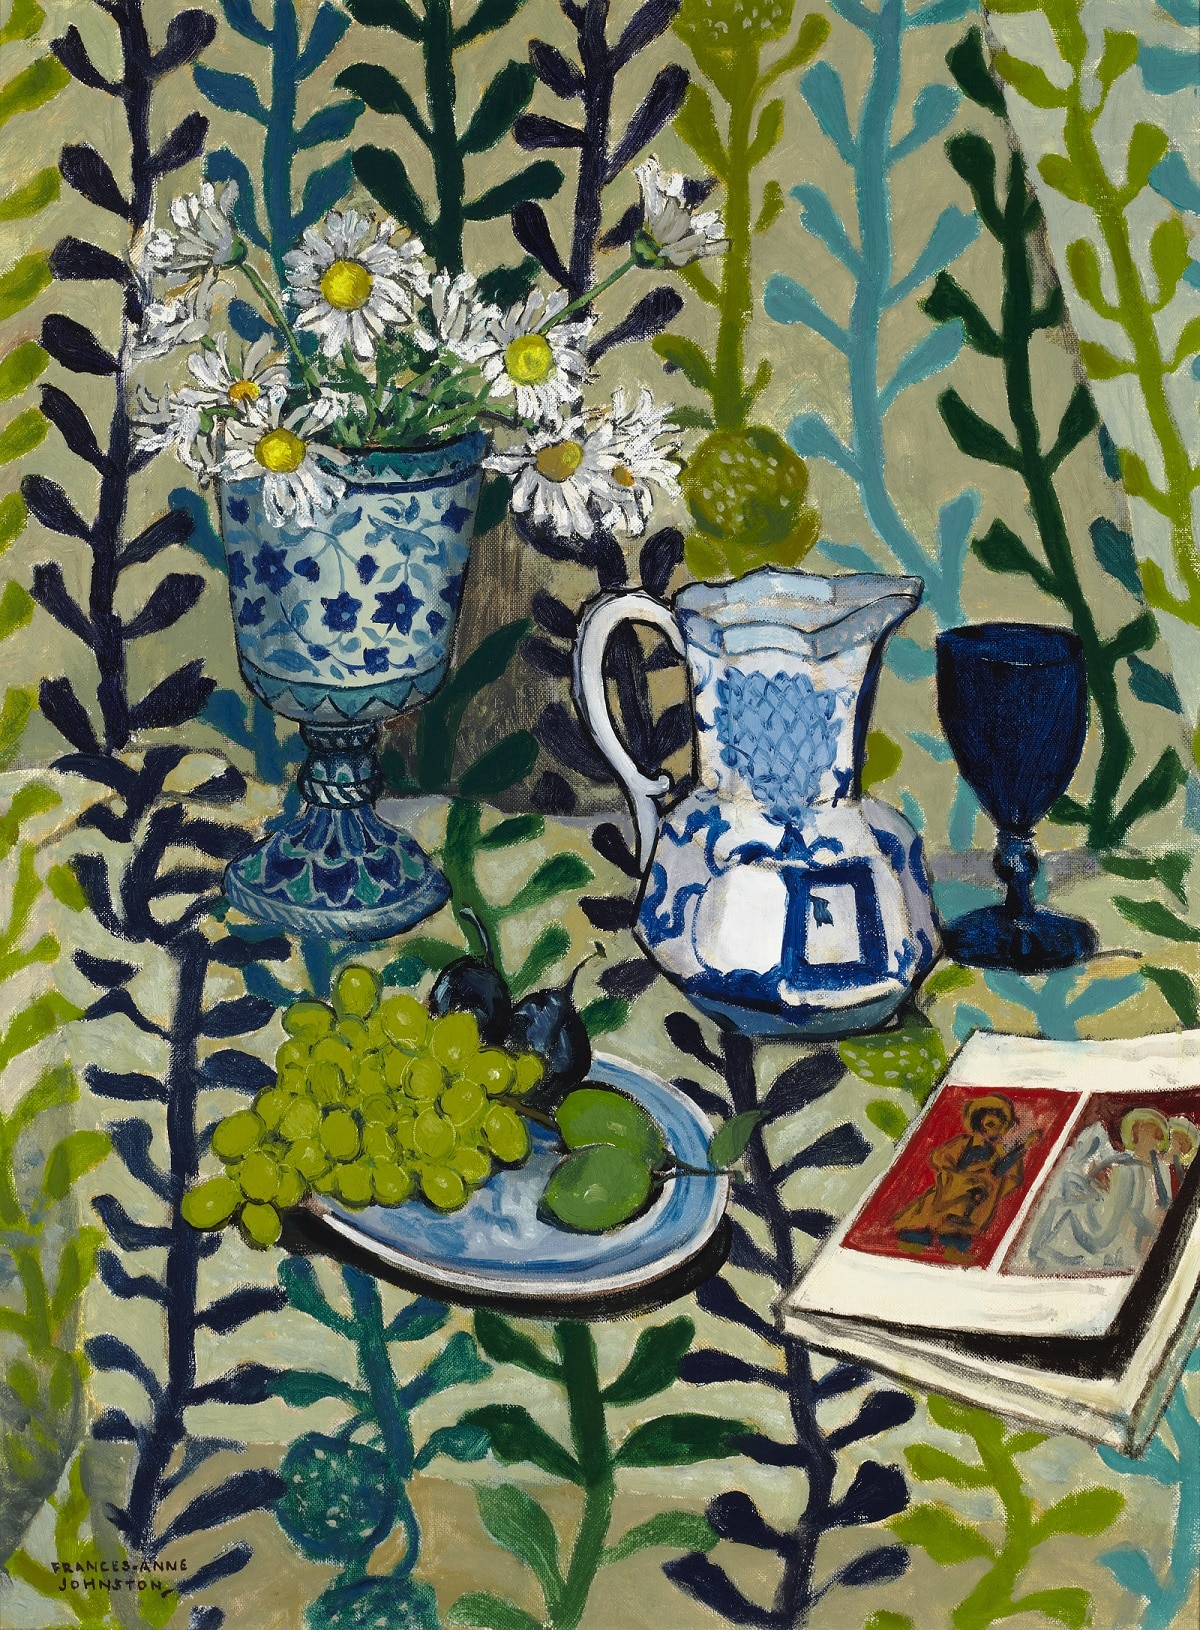 Oil painting of a vase with white flowers, water pitcher and goblet, plate with grapes, and a book